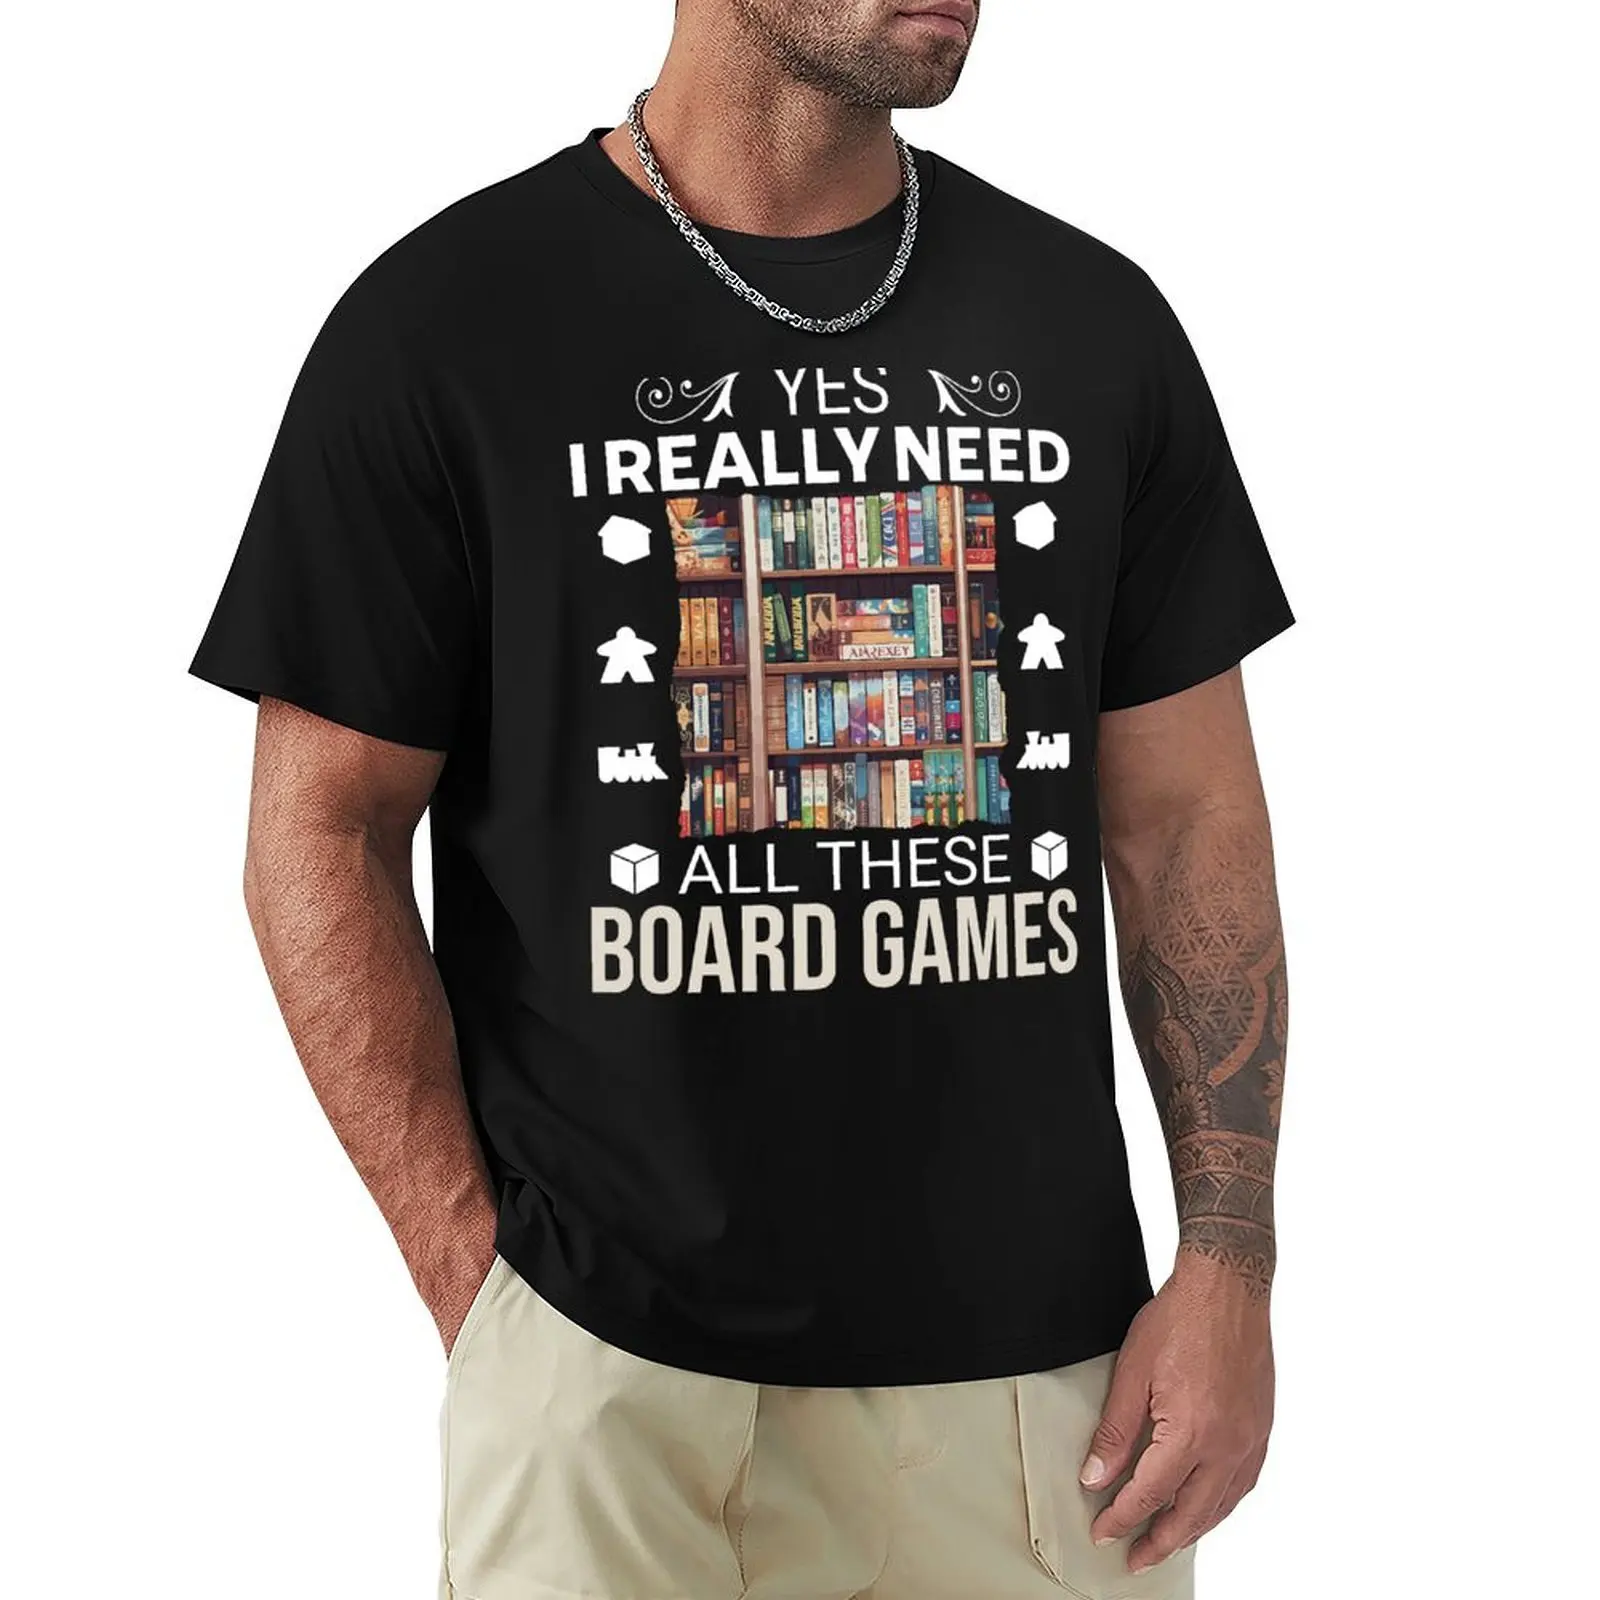 

Yes, I really need all these board games! - Kallax Collection: Board Gamer's Pride! T-Shirt plain boys whites mens t shirts pack